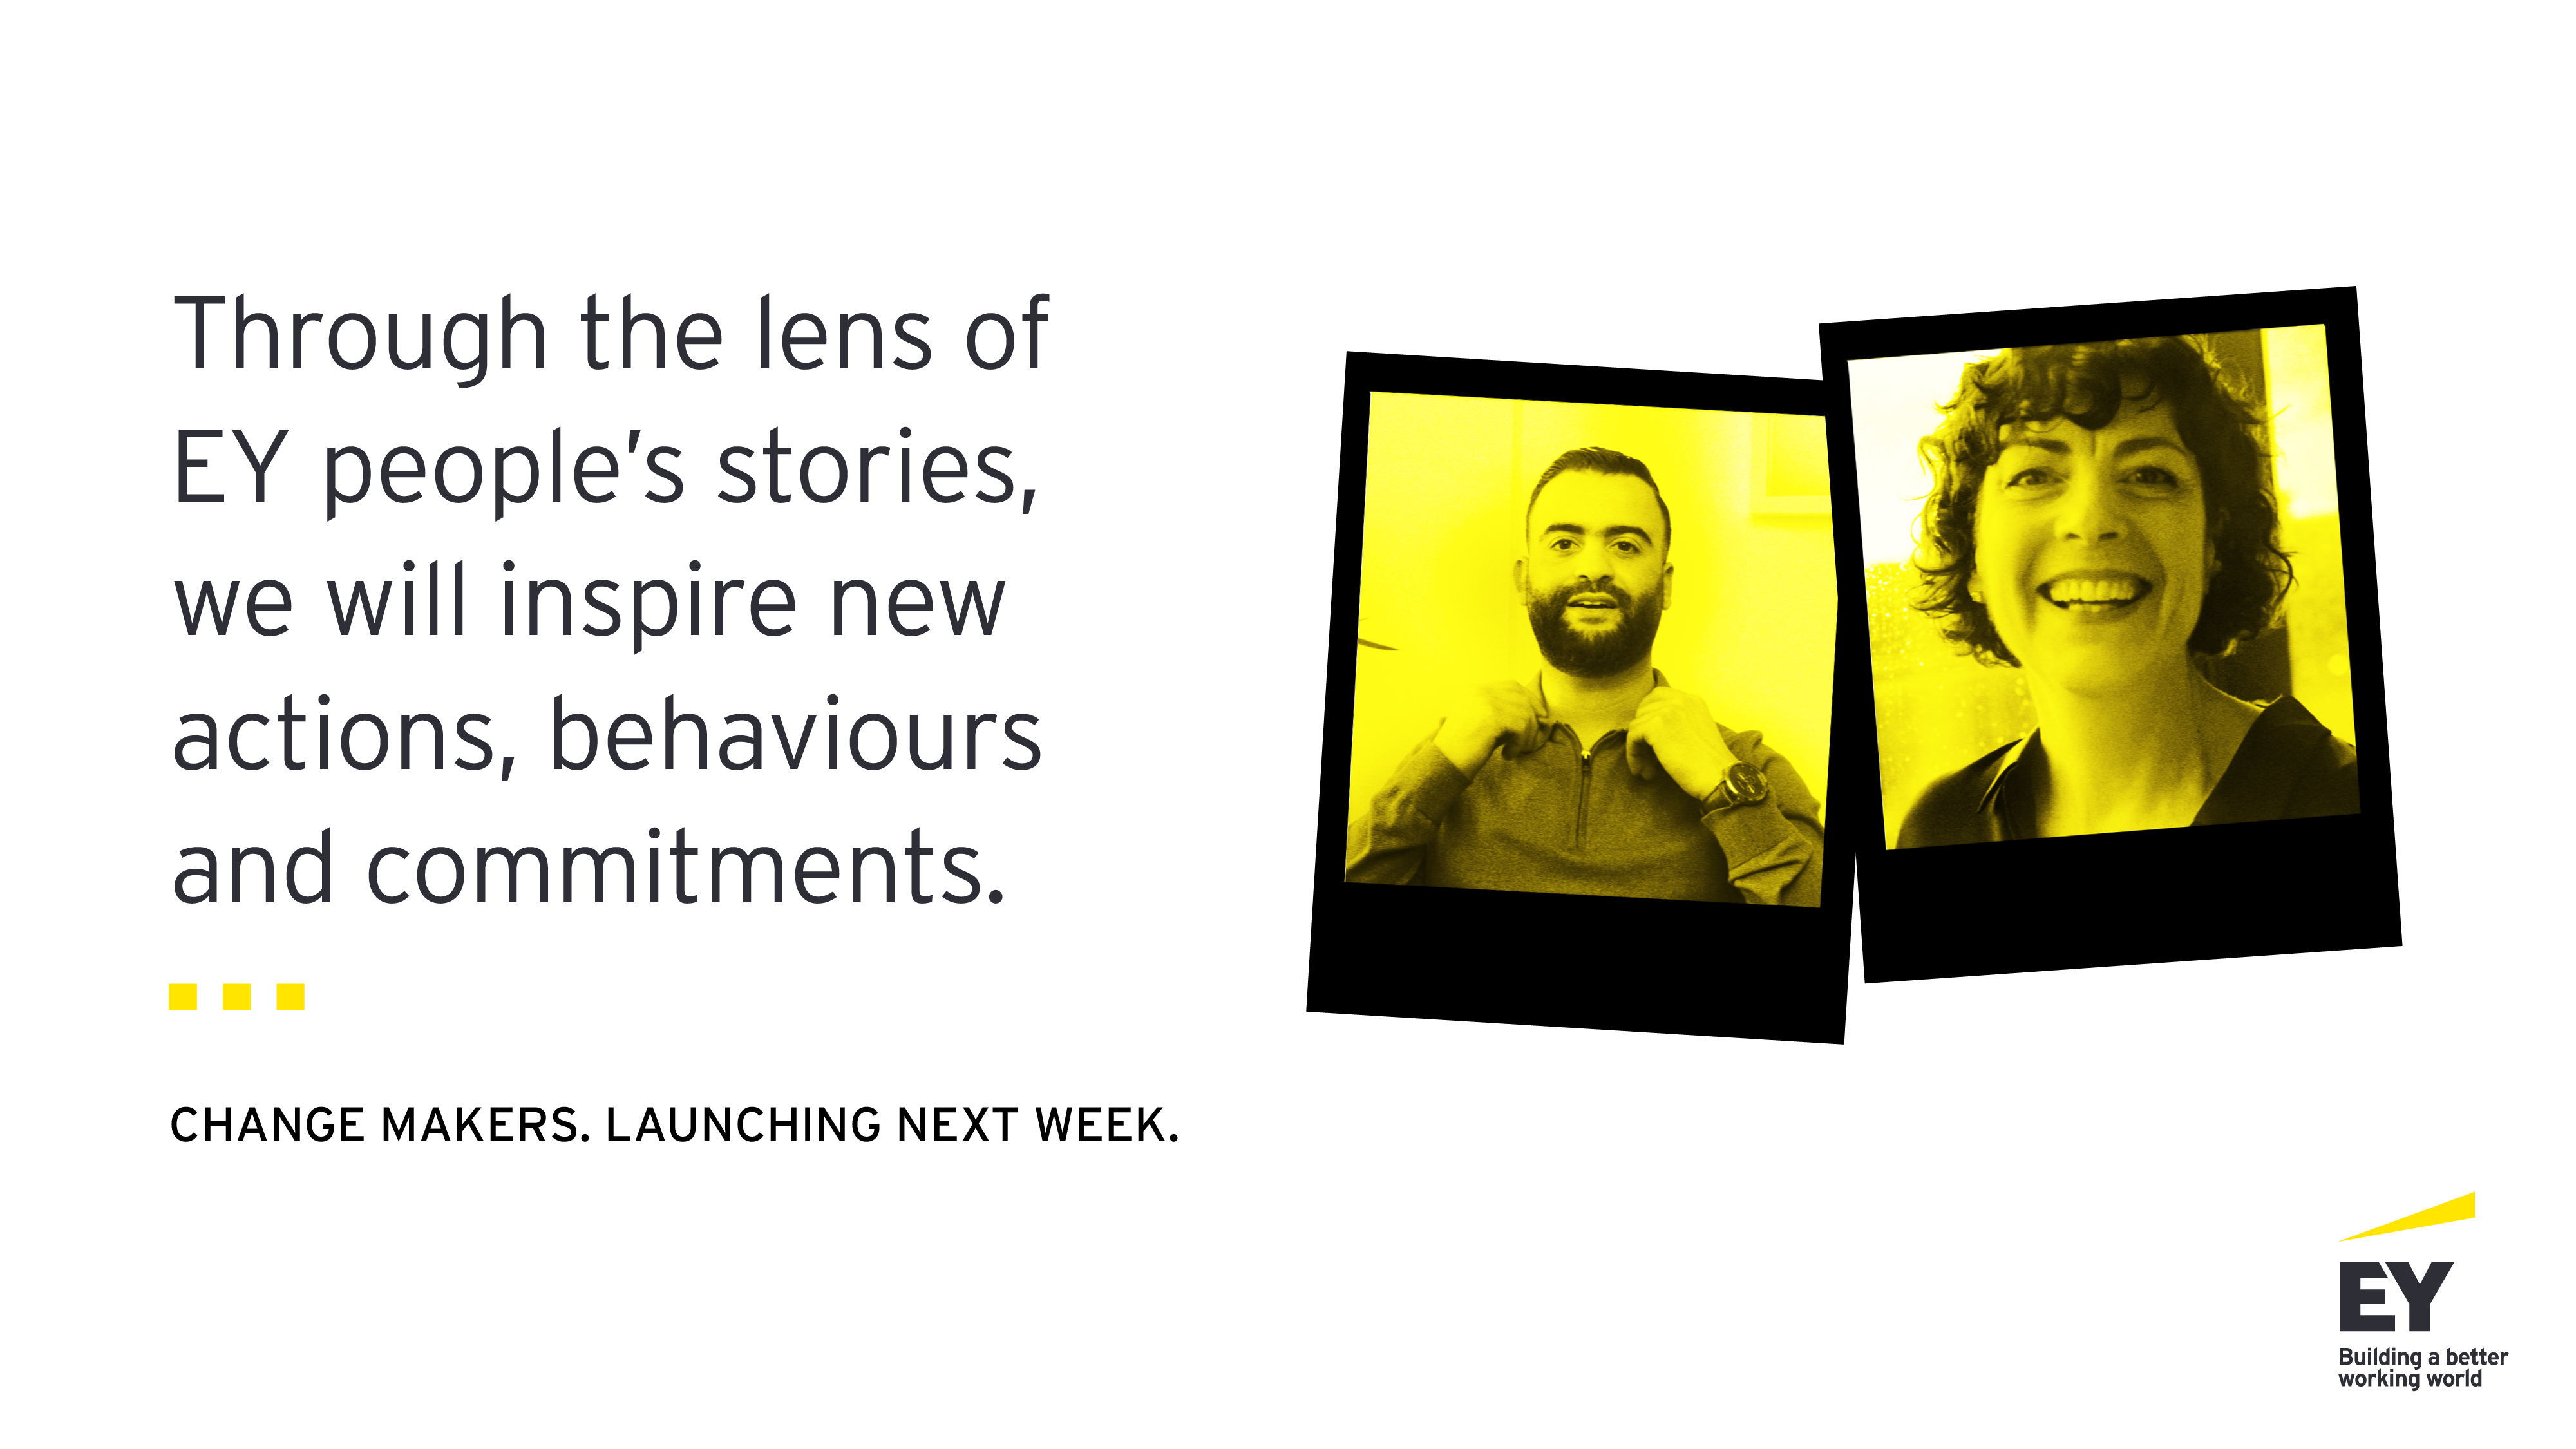 Two yellow polaroids of an arabic man and white woman sit next to the text 'Through the lens of EY People's stories, we will inspire new actions, behaviours and commitments. Change makers. Launching next week.